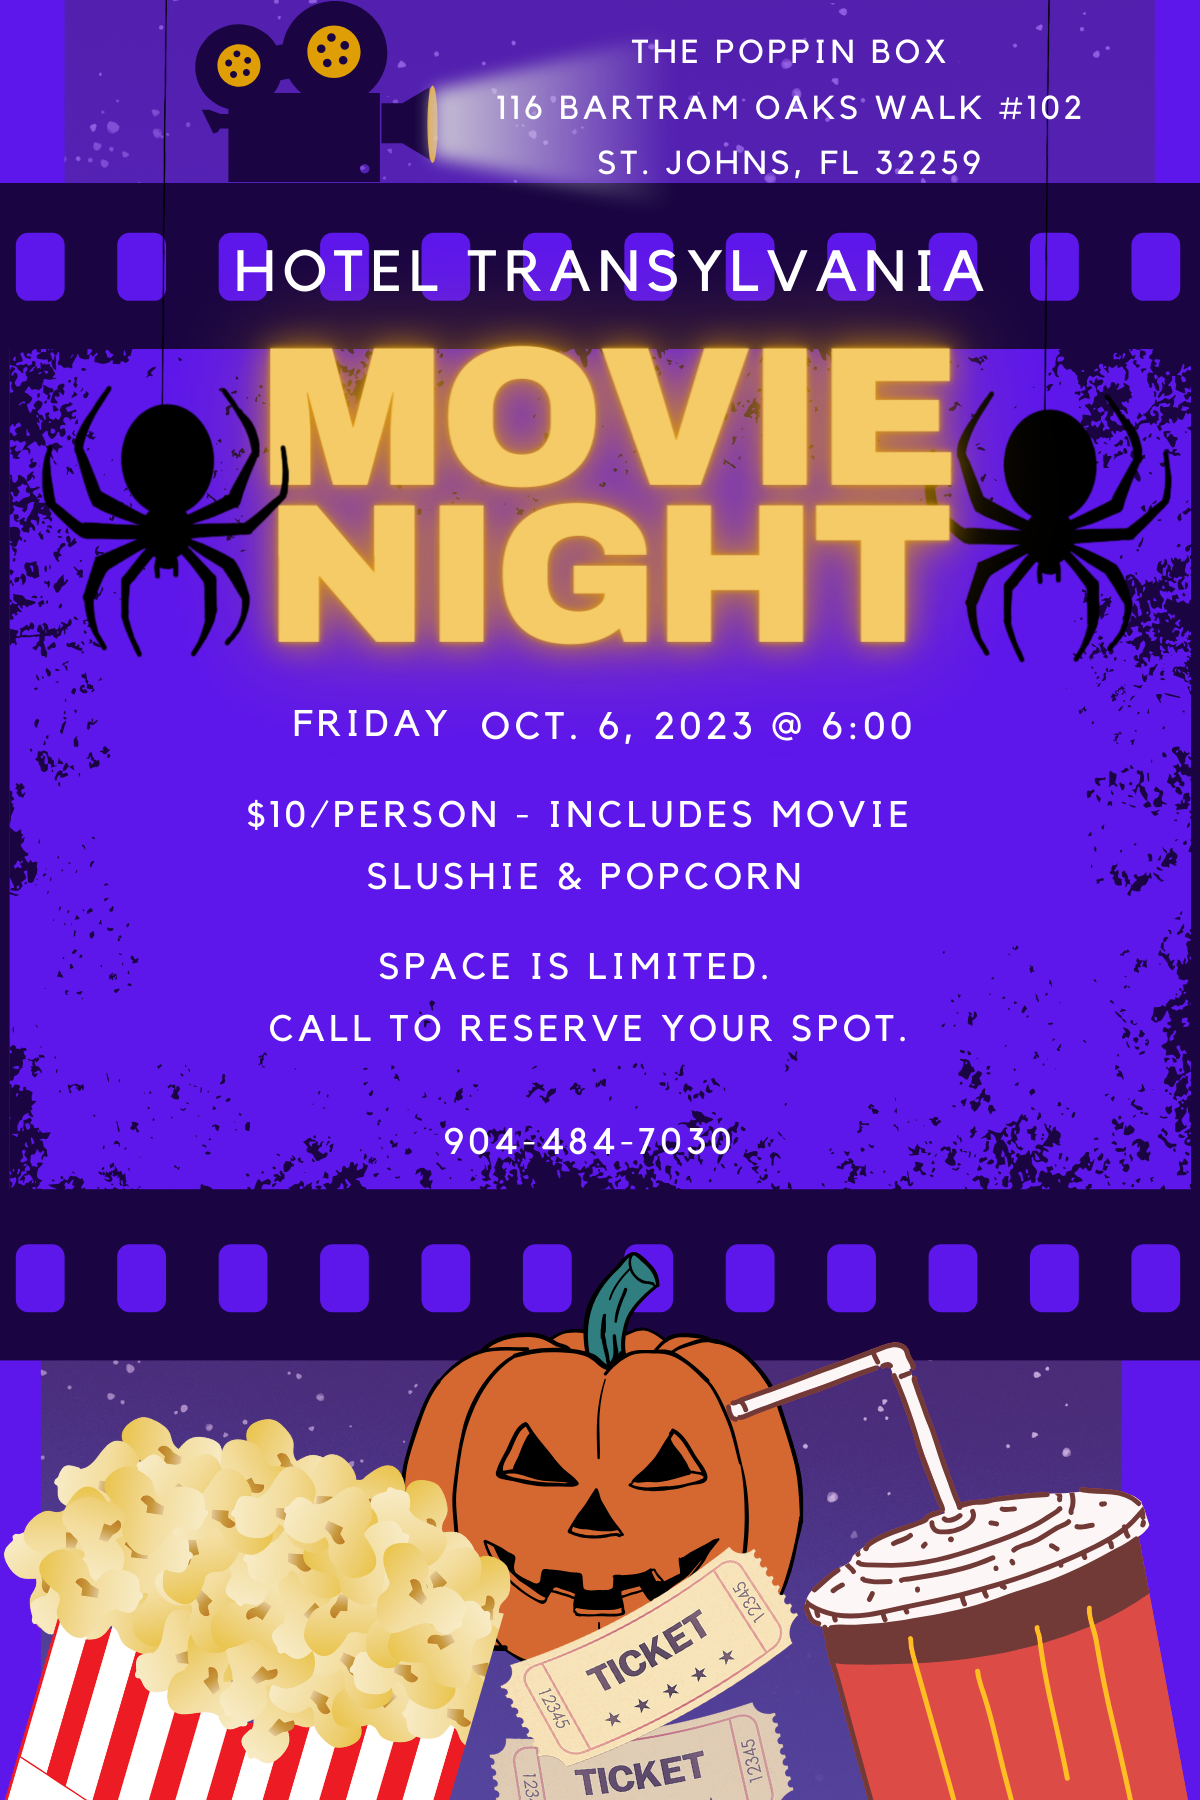 Movie Night at the Poppin Box is to be a sure night of fun!